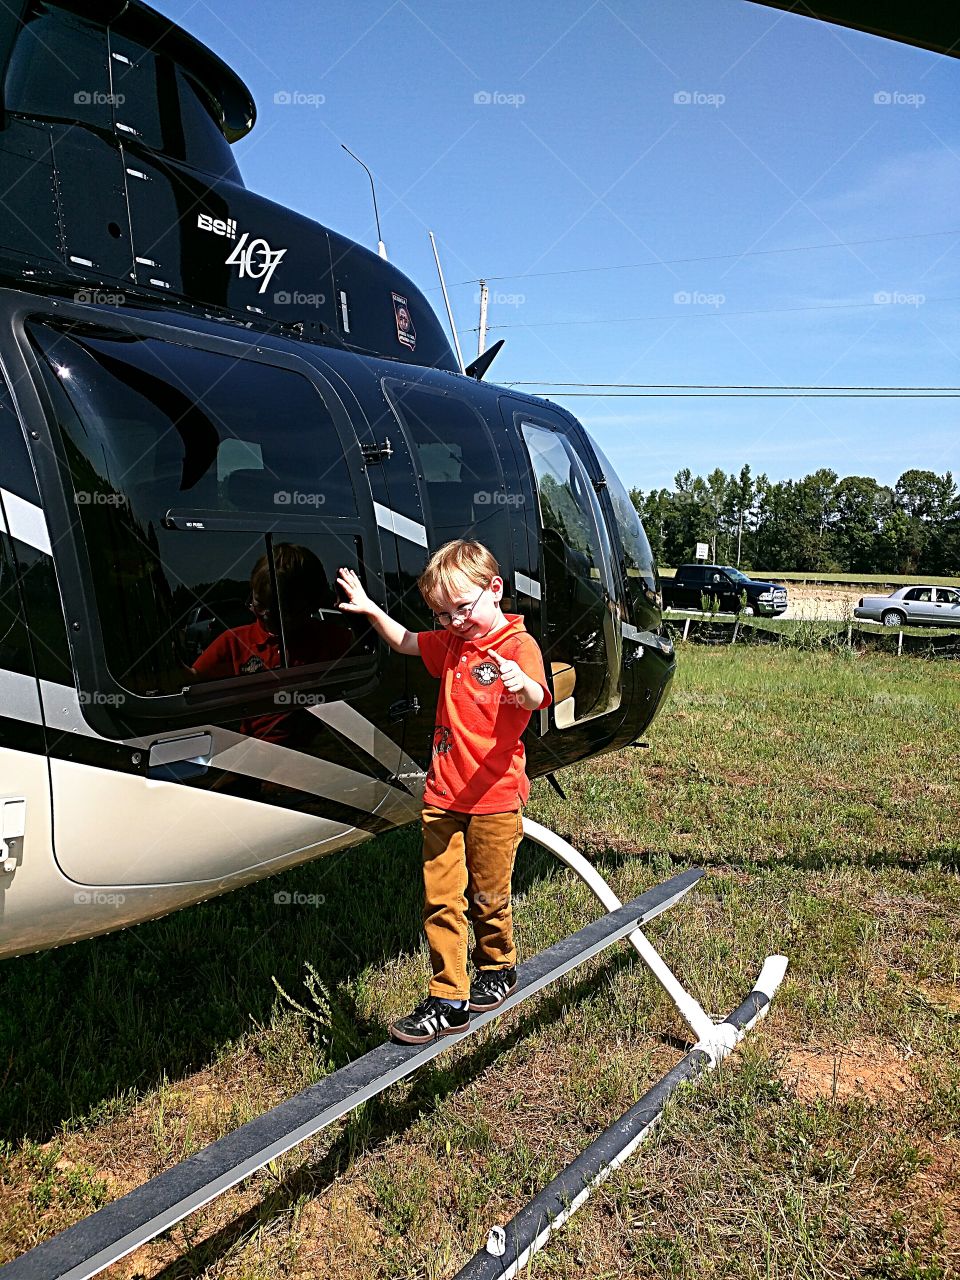 Rio: River will most likely never fly a helicopter. Despite this clearly staged photo, he is actually quite unnerved by most things mobile. Two feet already firmly on the ground, he is a circumspect five year old who prefers books and movies and make believe.